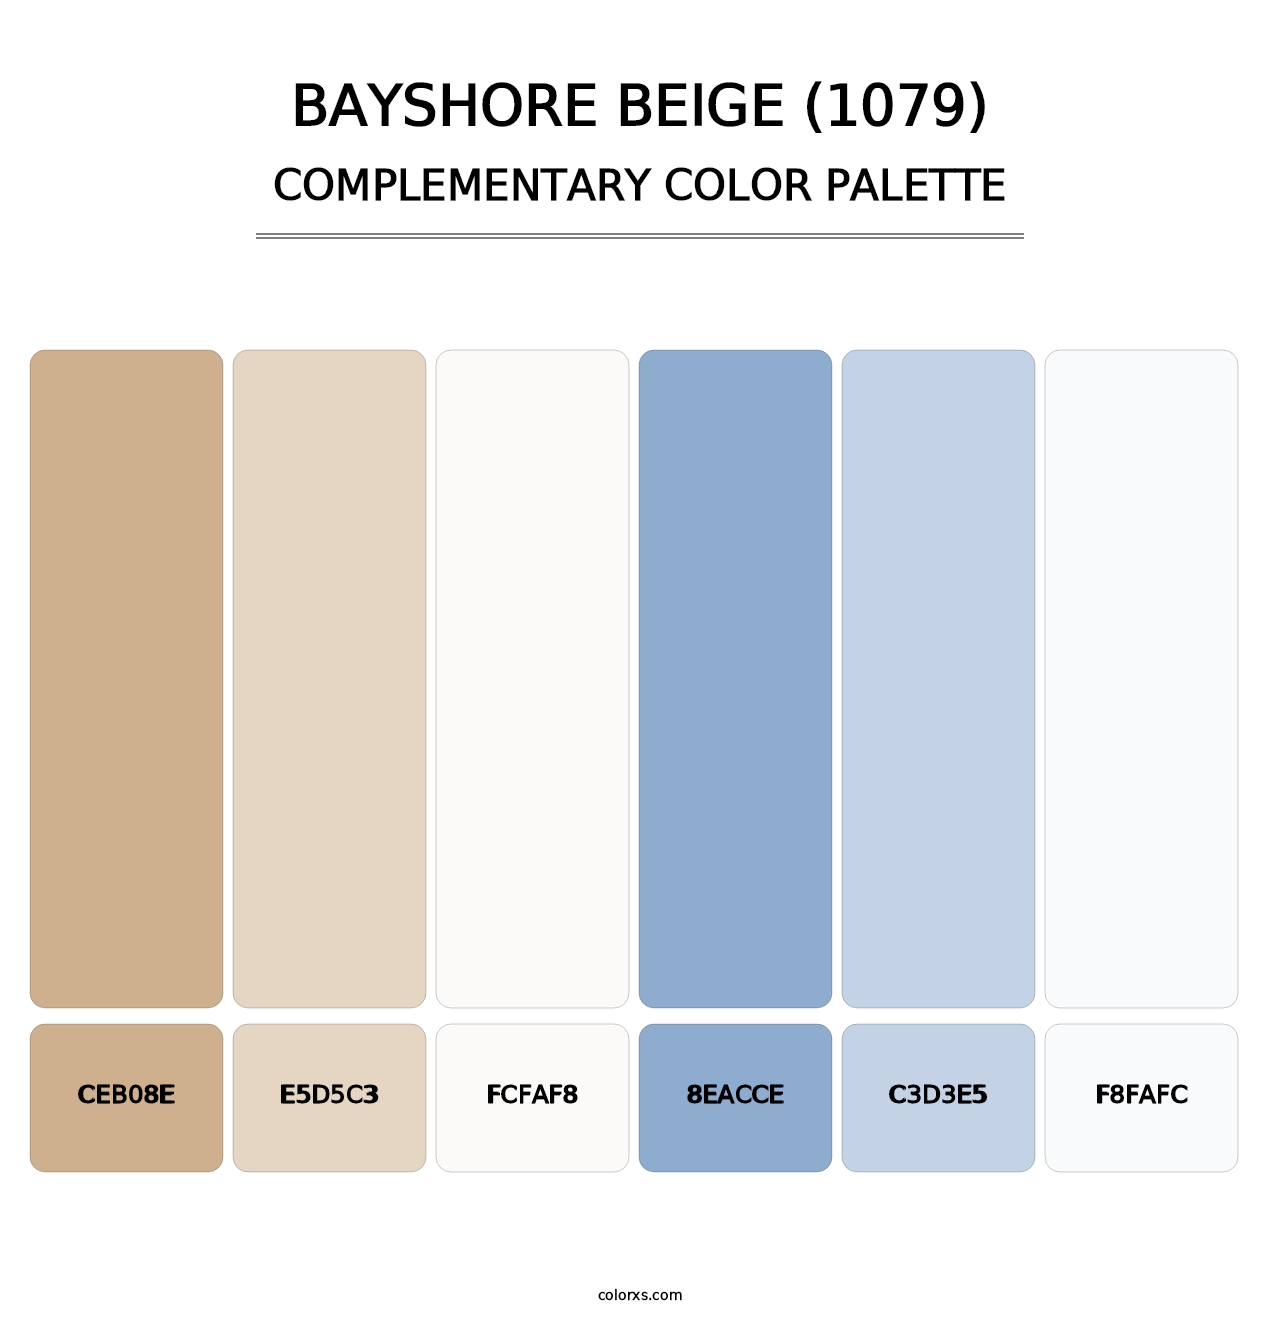 Bayshore Beige (1079) - Complementary Color Palette